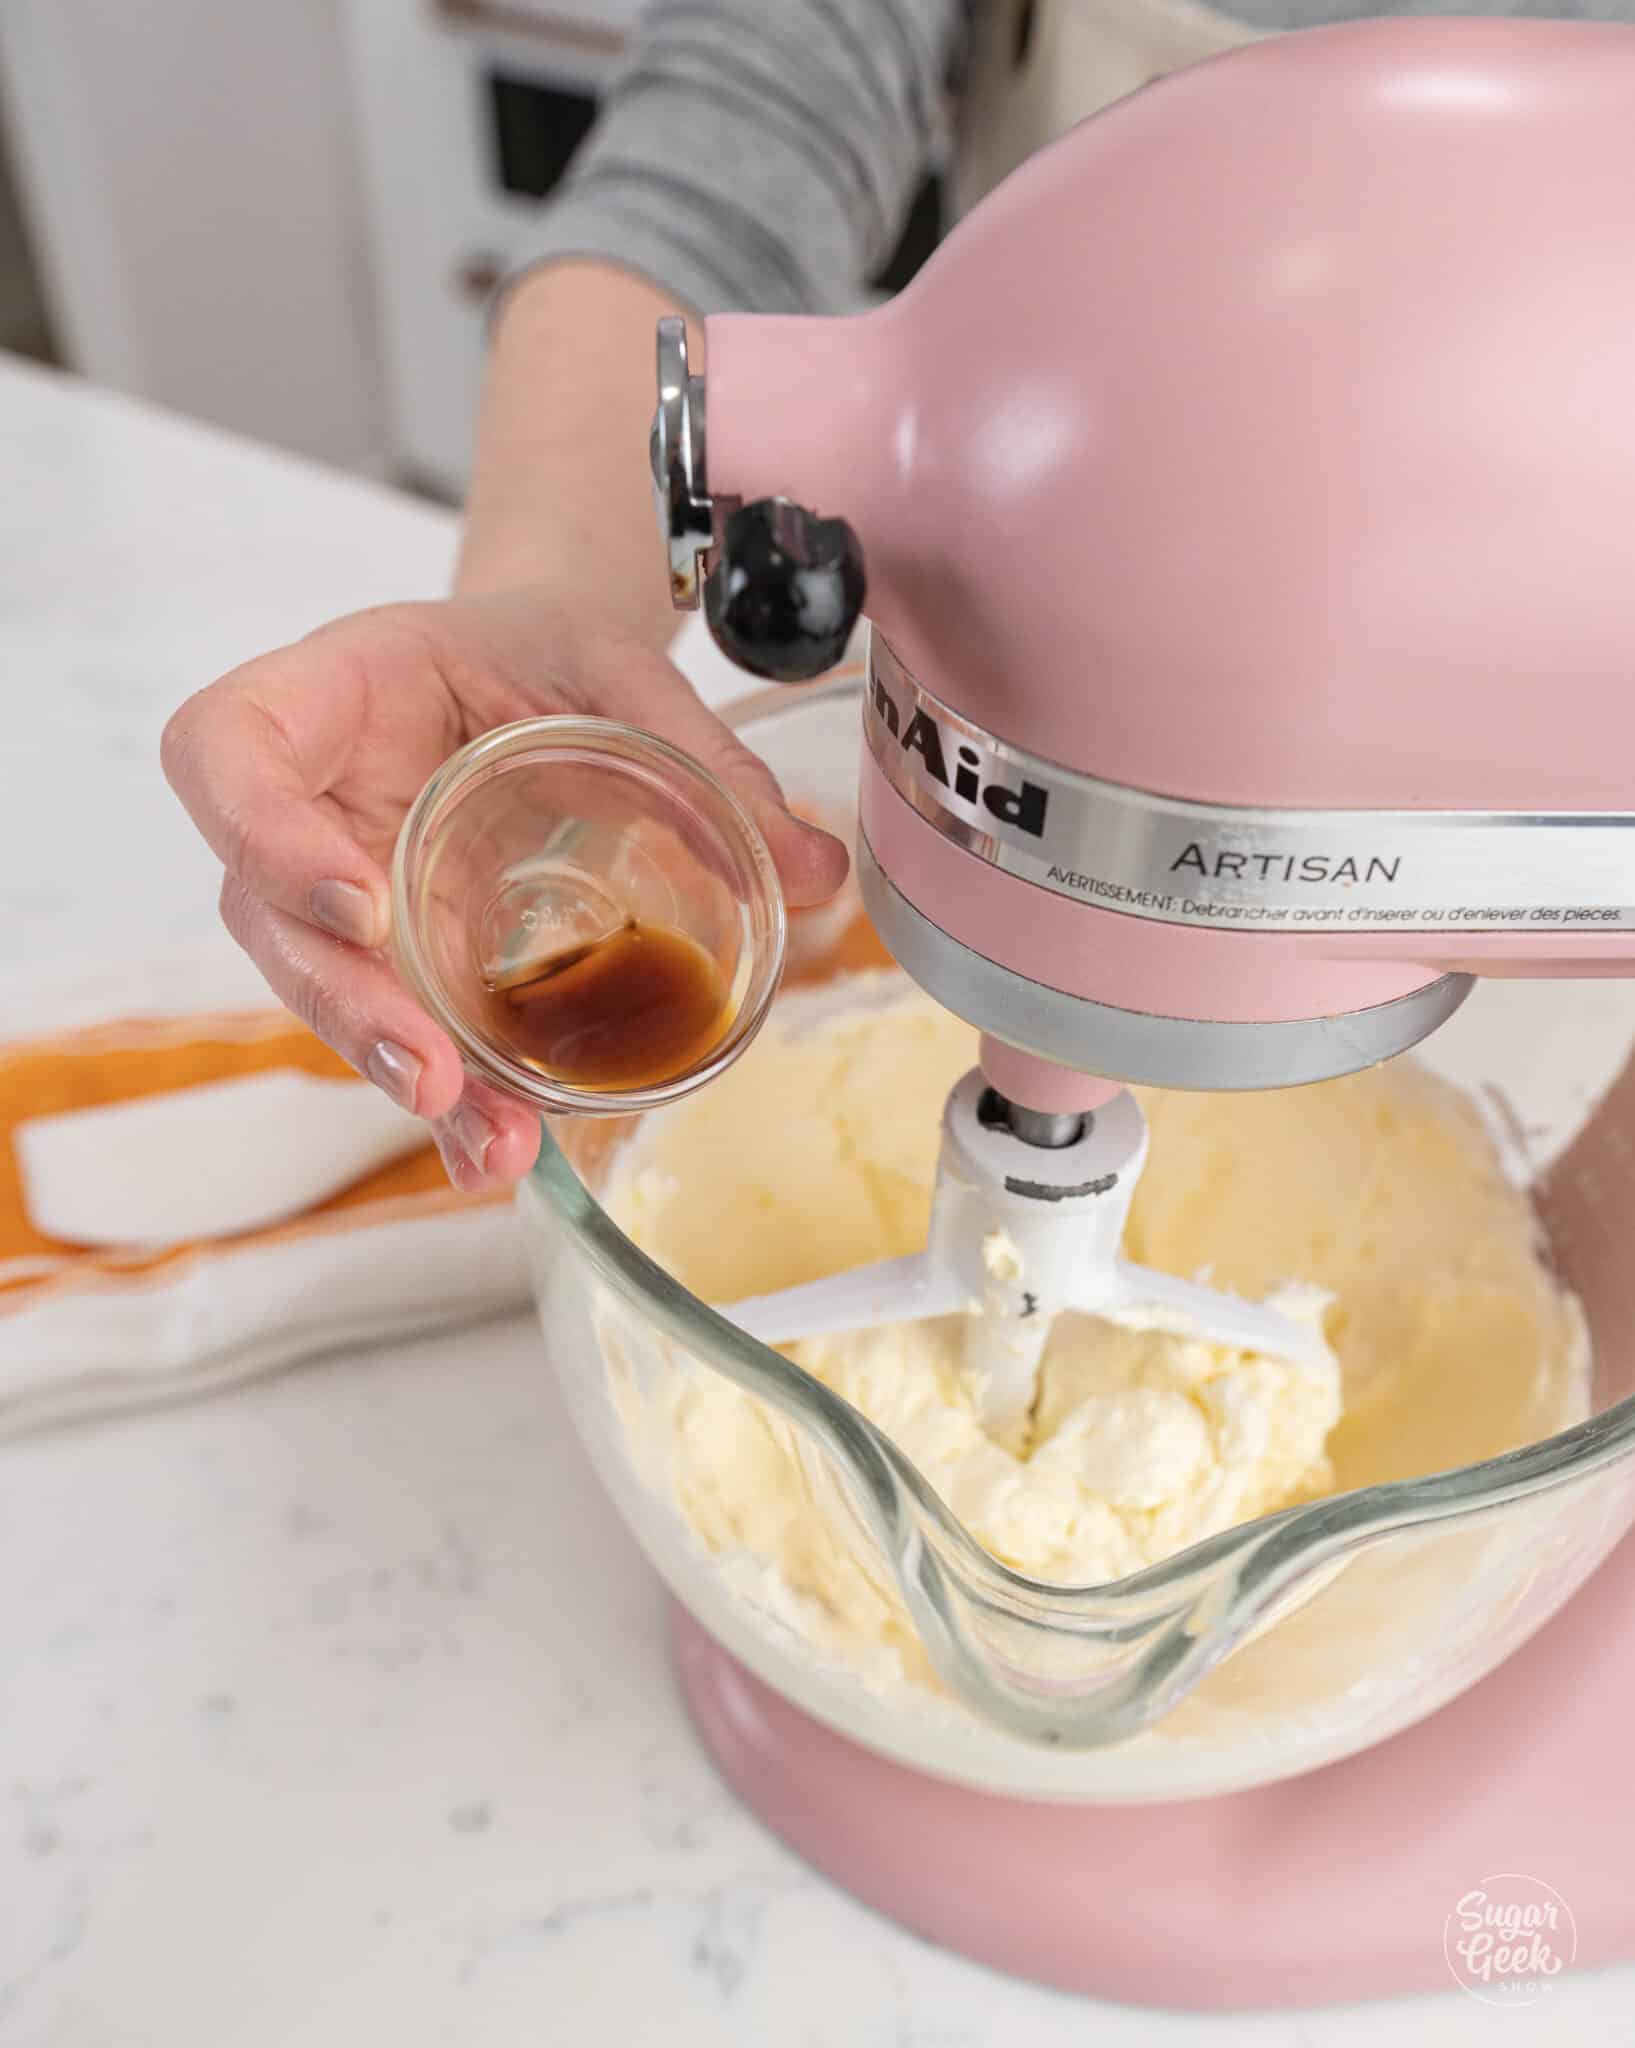 Hand pouring a container of sugar into a stand mixer bowl